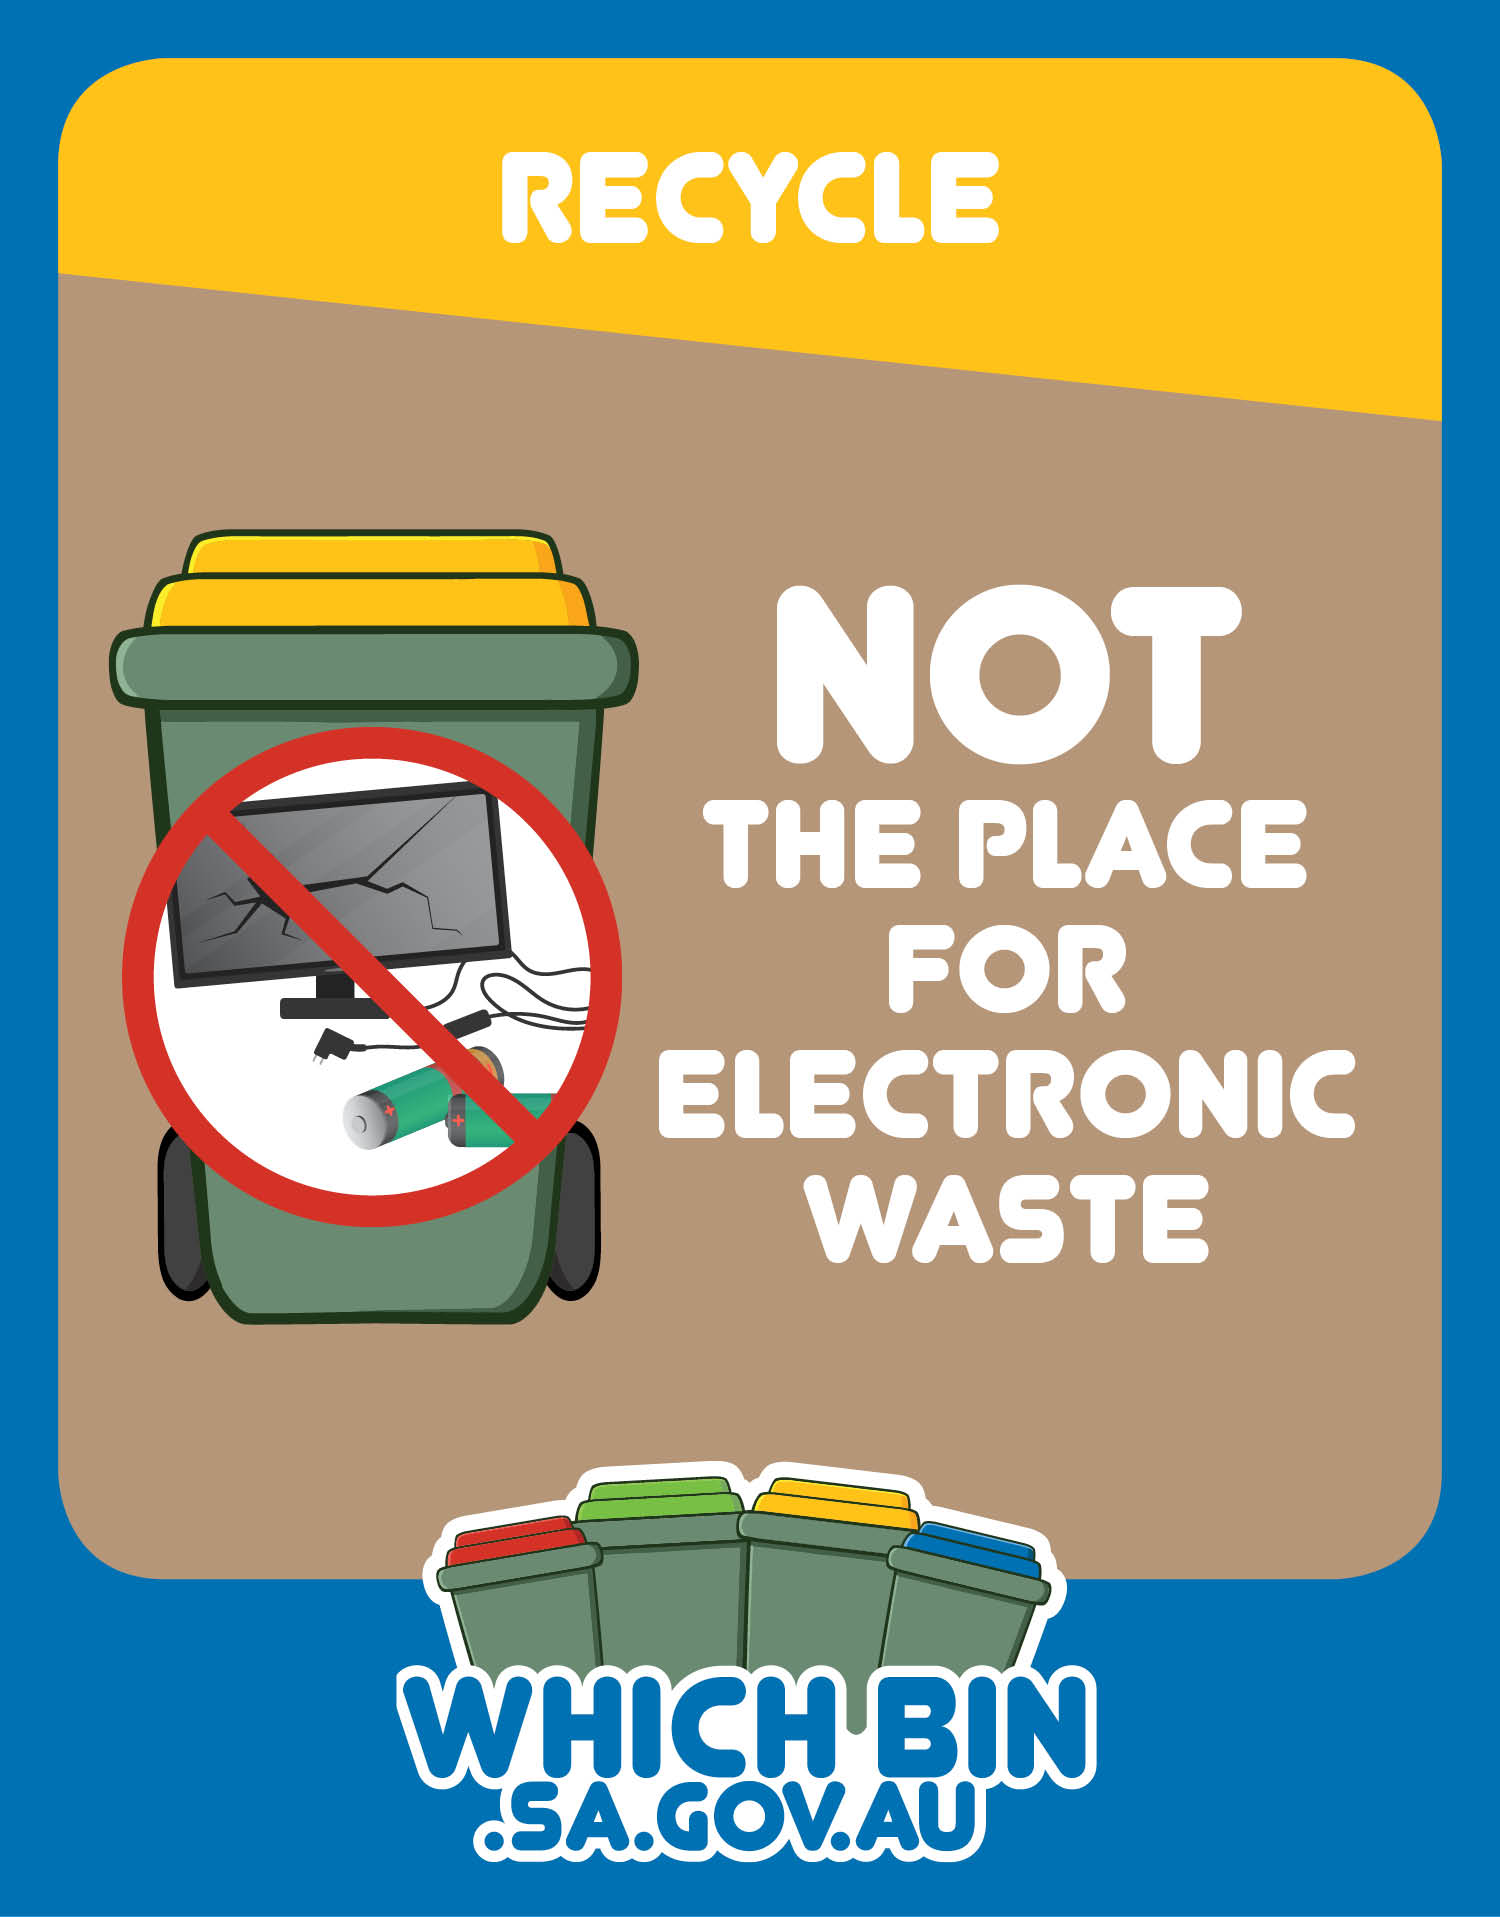 Recycle your old electronic items at a recycling centre.